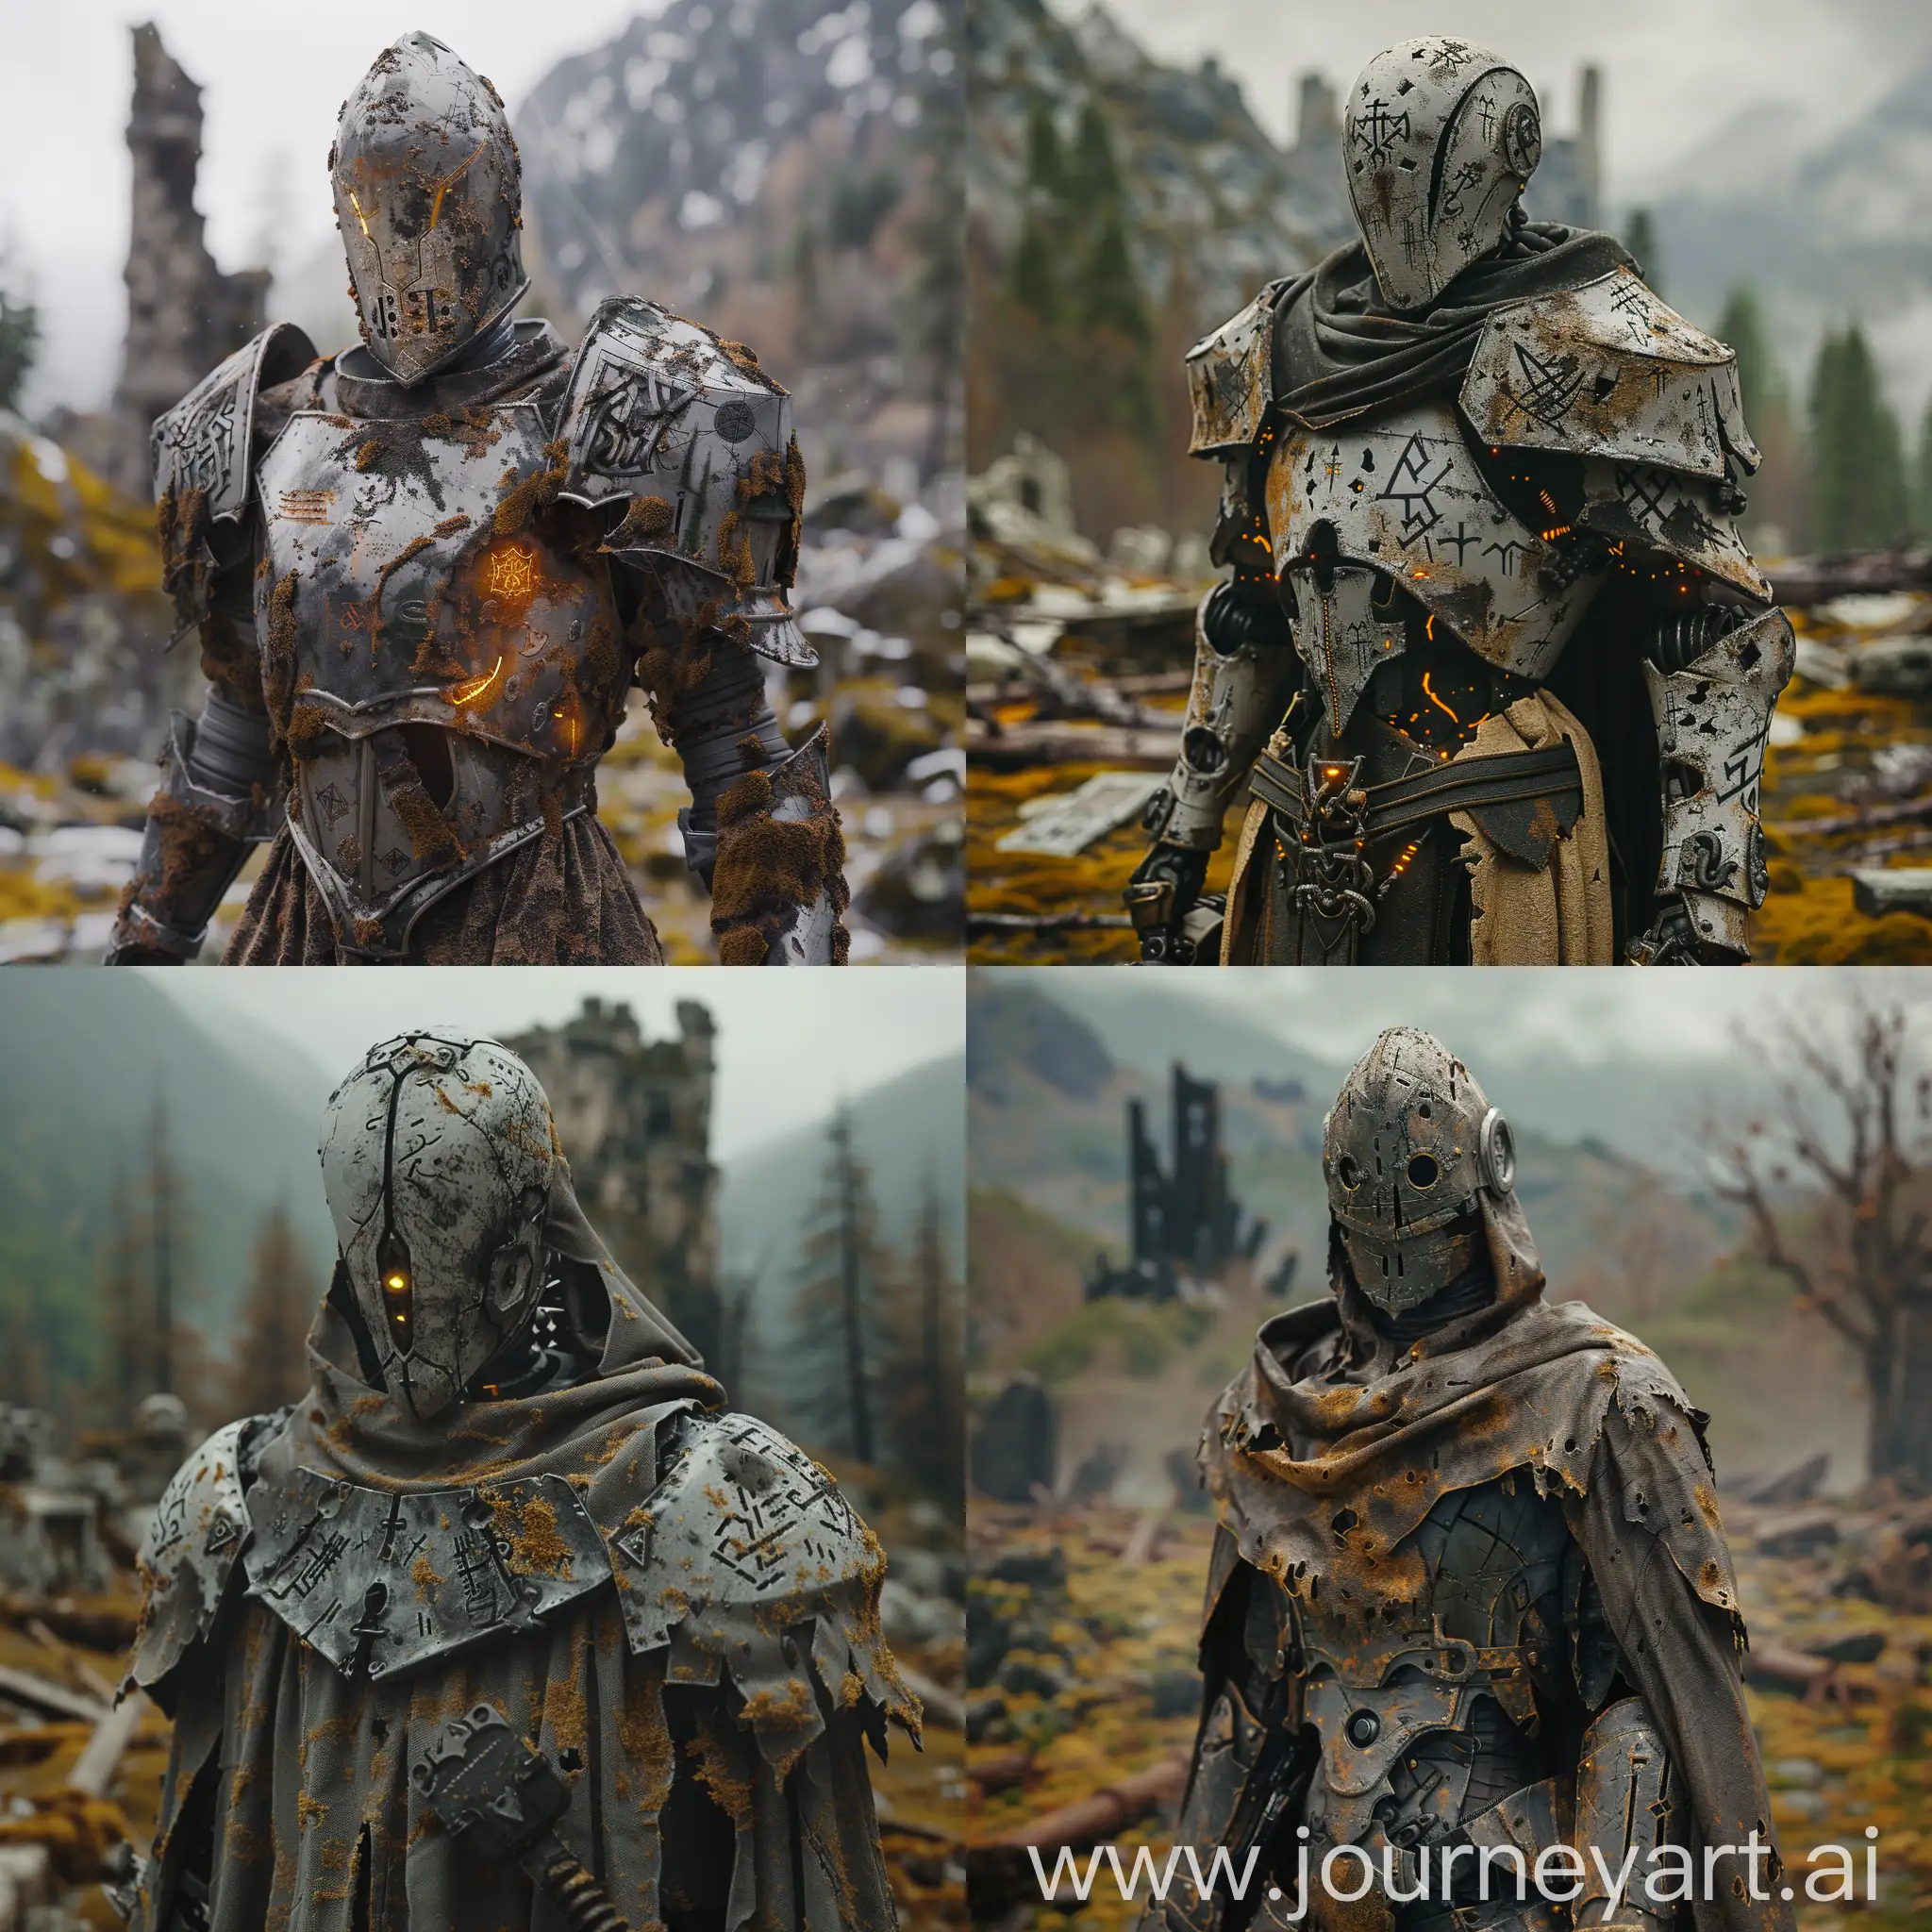 Masterpiece, 4k, unreal engine m5, volumetric lighting, dof, bokeh, hyper realism, adof, vignette, dust, moss, aged, scarred, burnt, runic, runes, paladin, holy, light, magic, scorcerer, mech, robot, warforged, dnd, light armour, dark fantasy, fantasy featureless helmet, highly detailed, tattered robes, burnt robes, destroyed land, castle ruins in background, burnt wood, unmarked tombs, mountainous background, dead forest